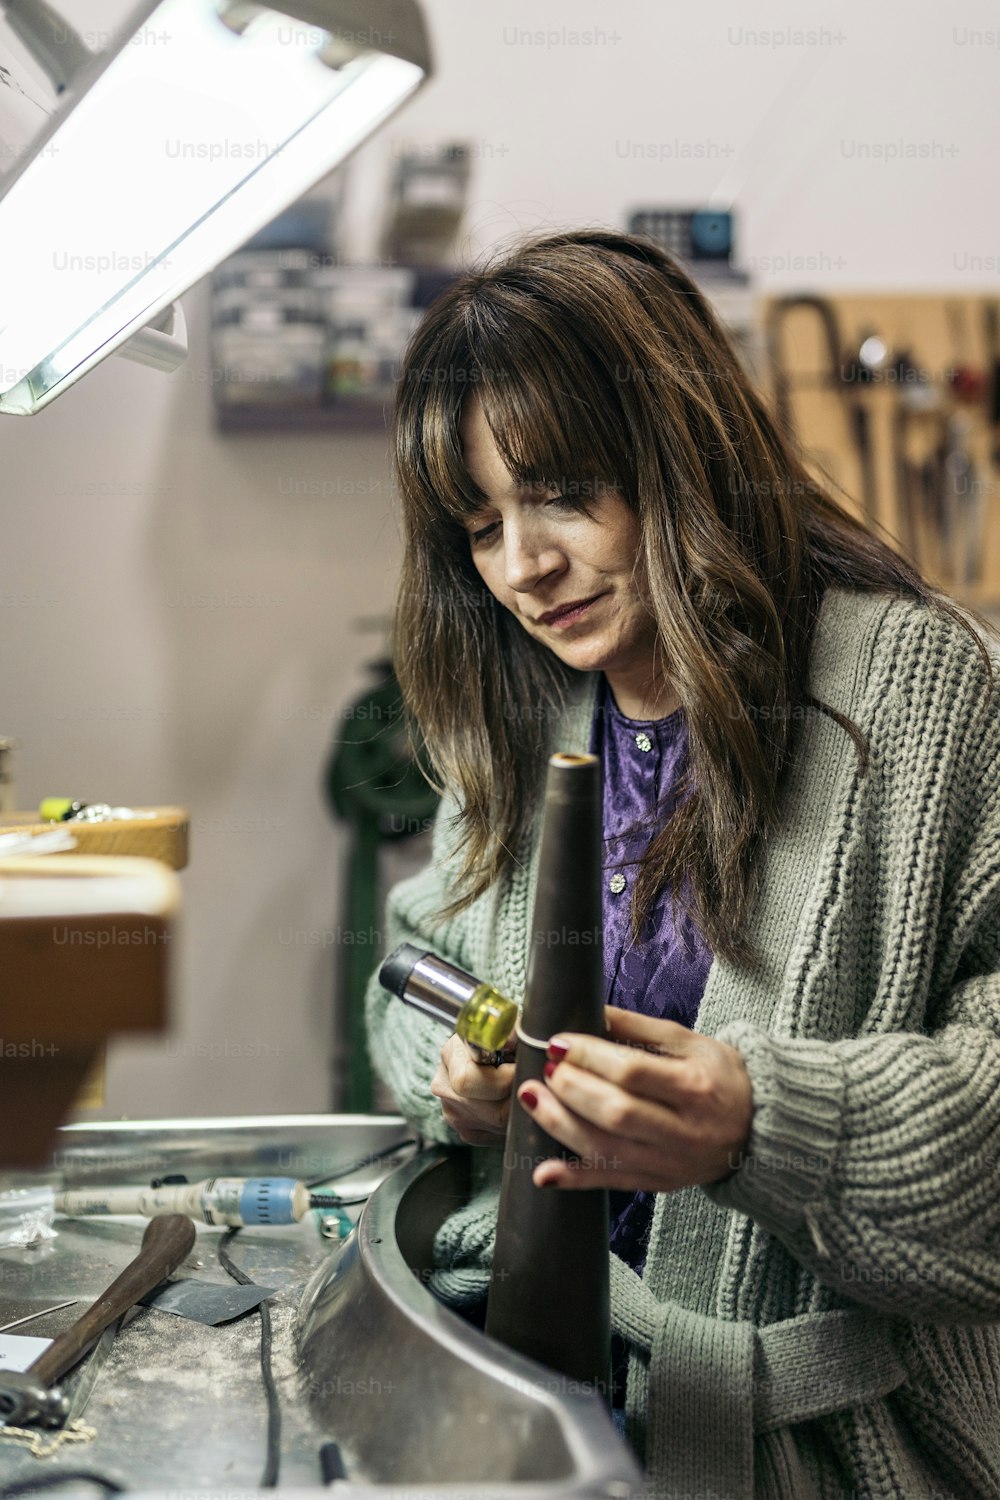 Concentrated woman using special tools in jewelry workshop.